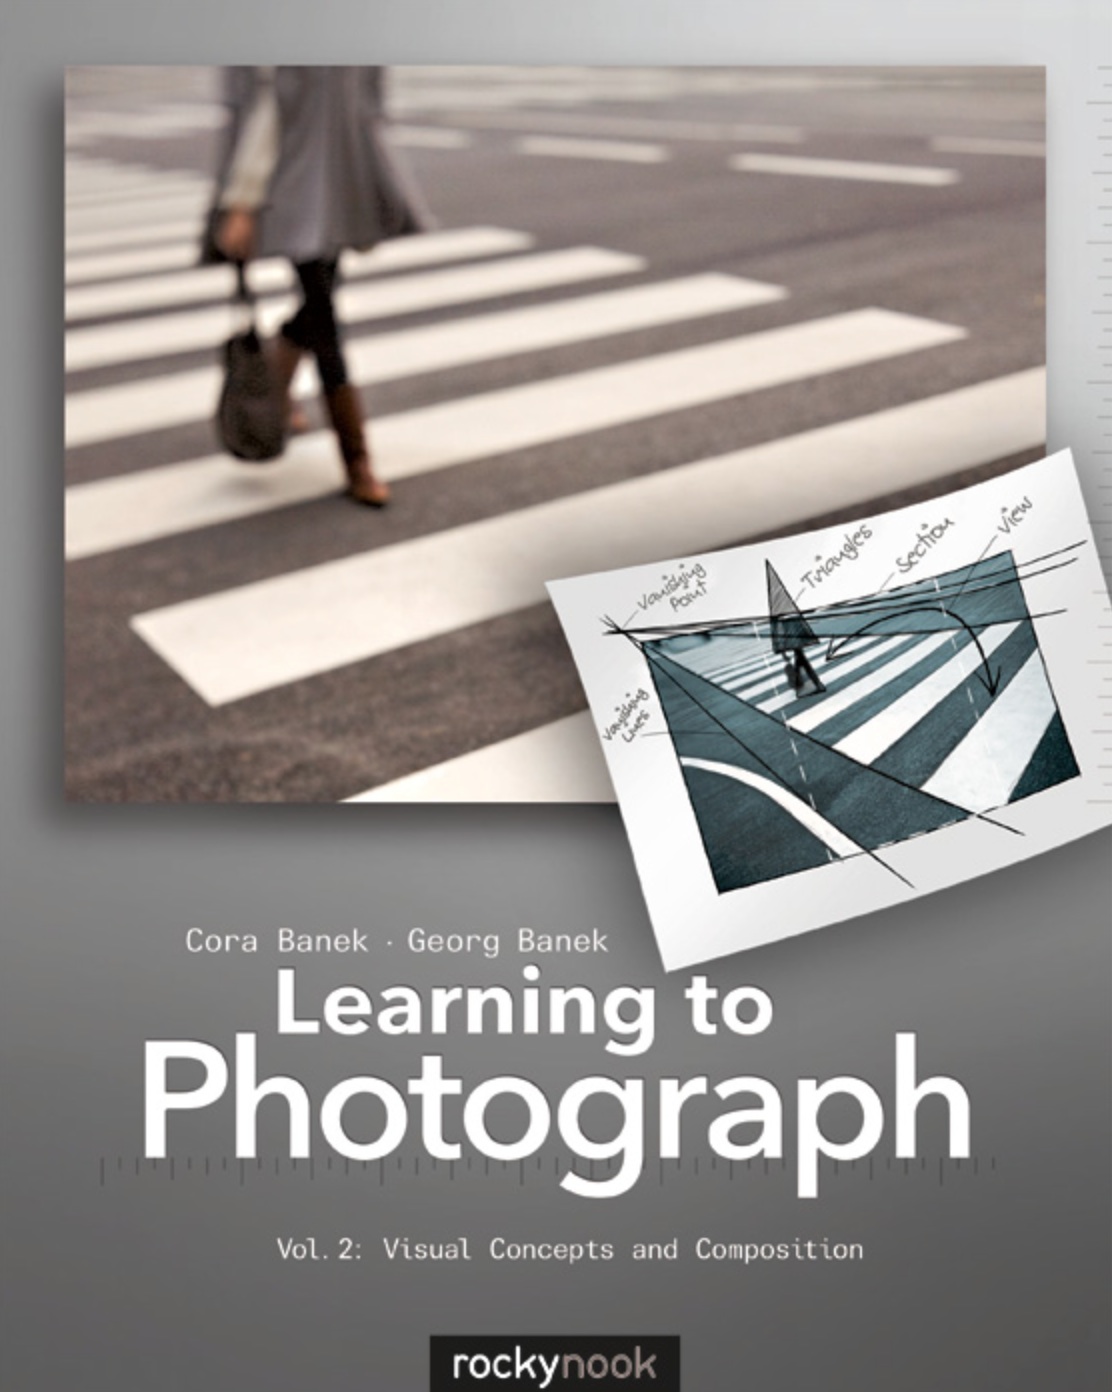 http://thedigitalstory.com/2014/09/30/learning-to-photograph-vol2.jpg